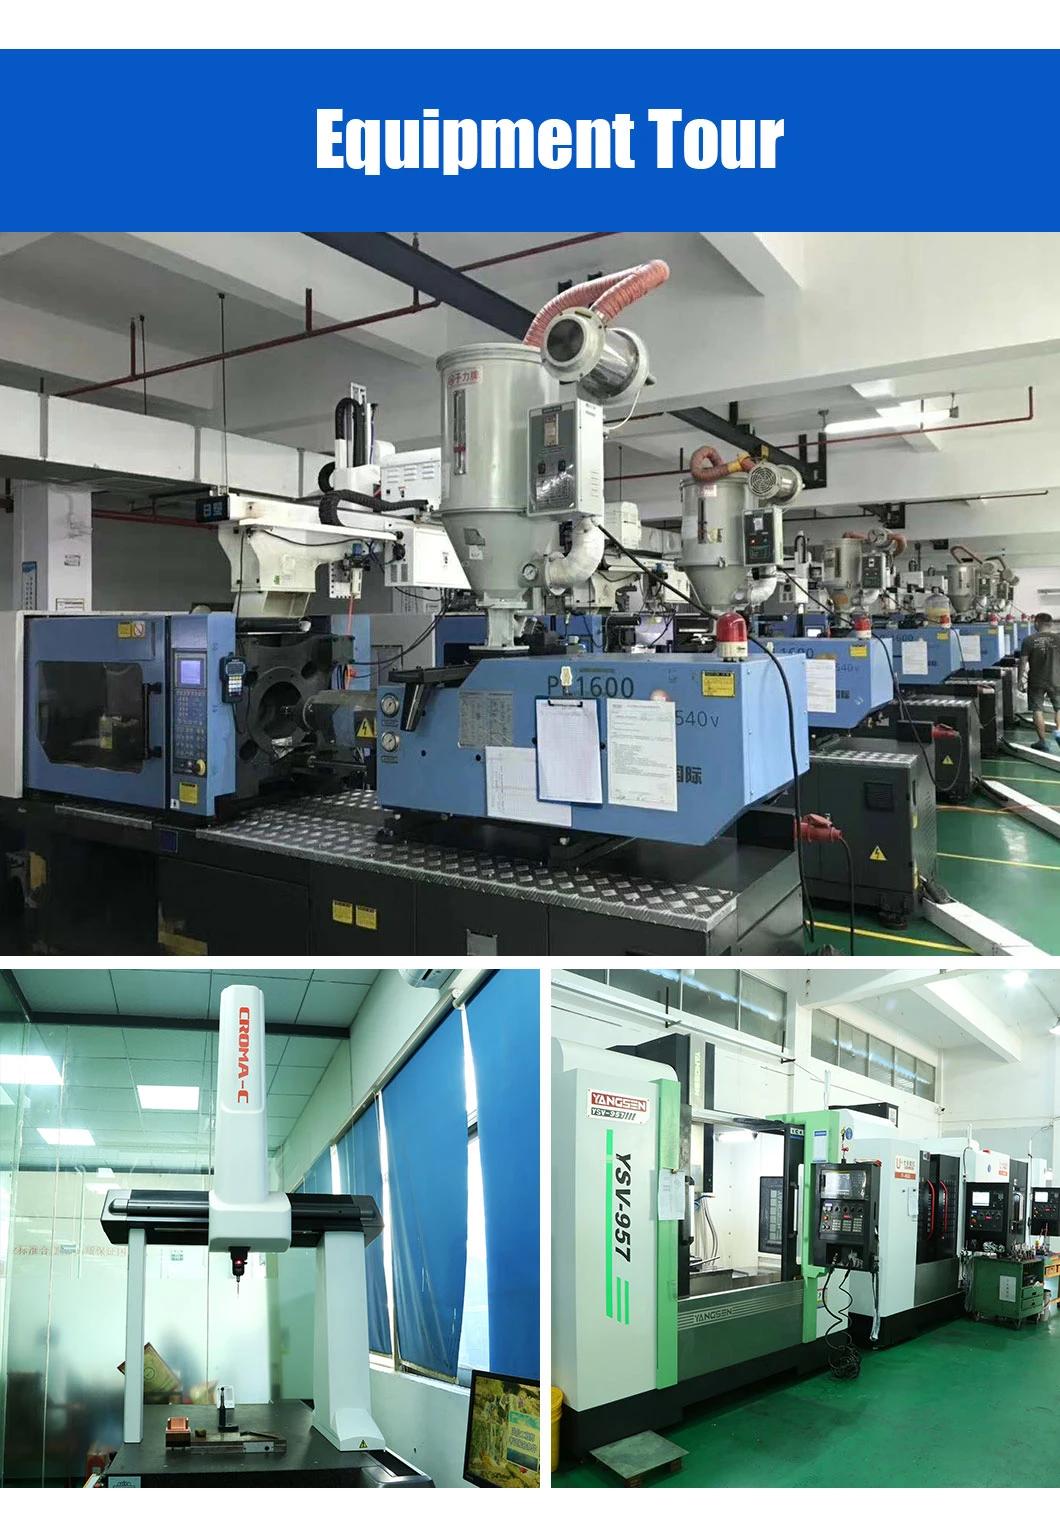 Professional Tooling Manufacturer From China Customized High Precision Laser Machine Control Panel Mould Mold OEM